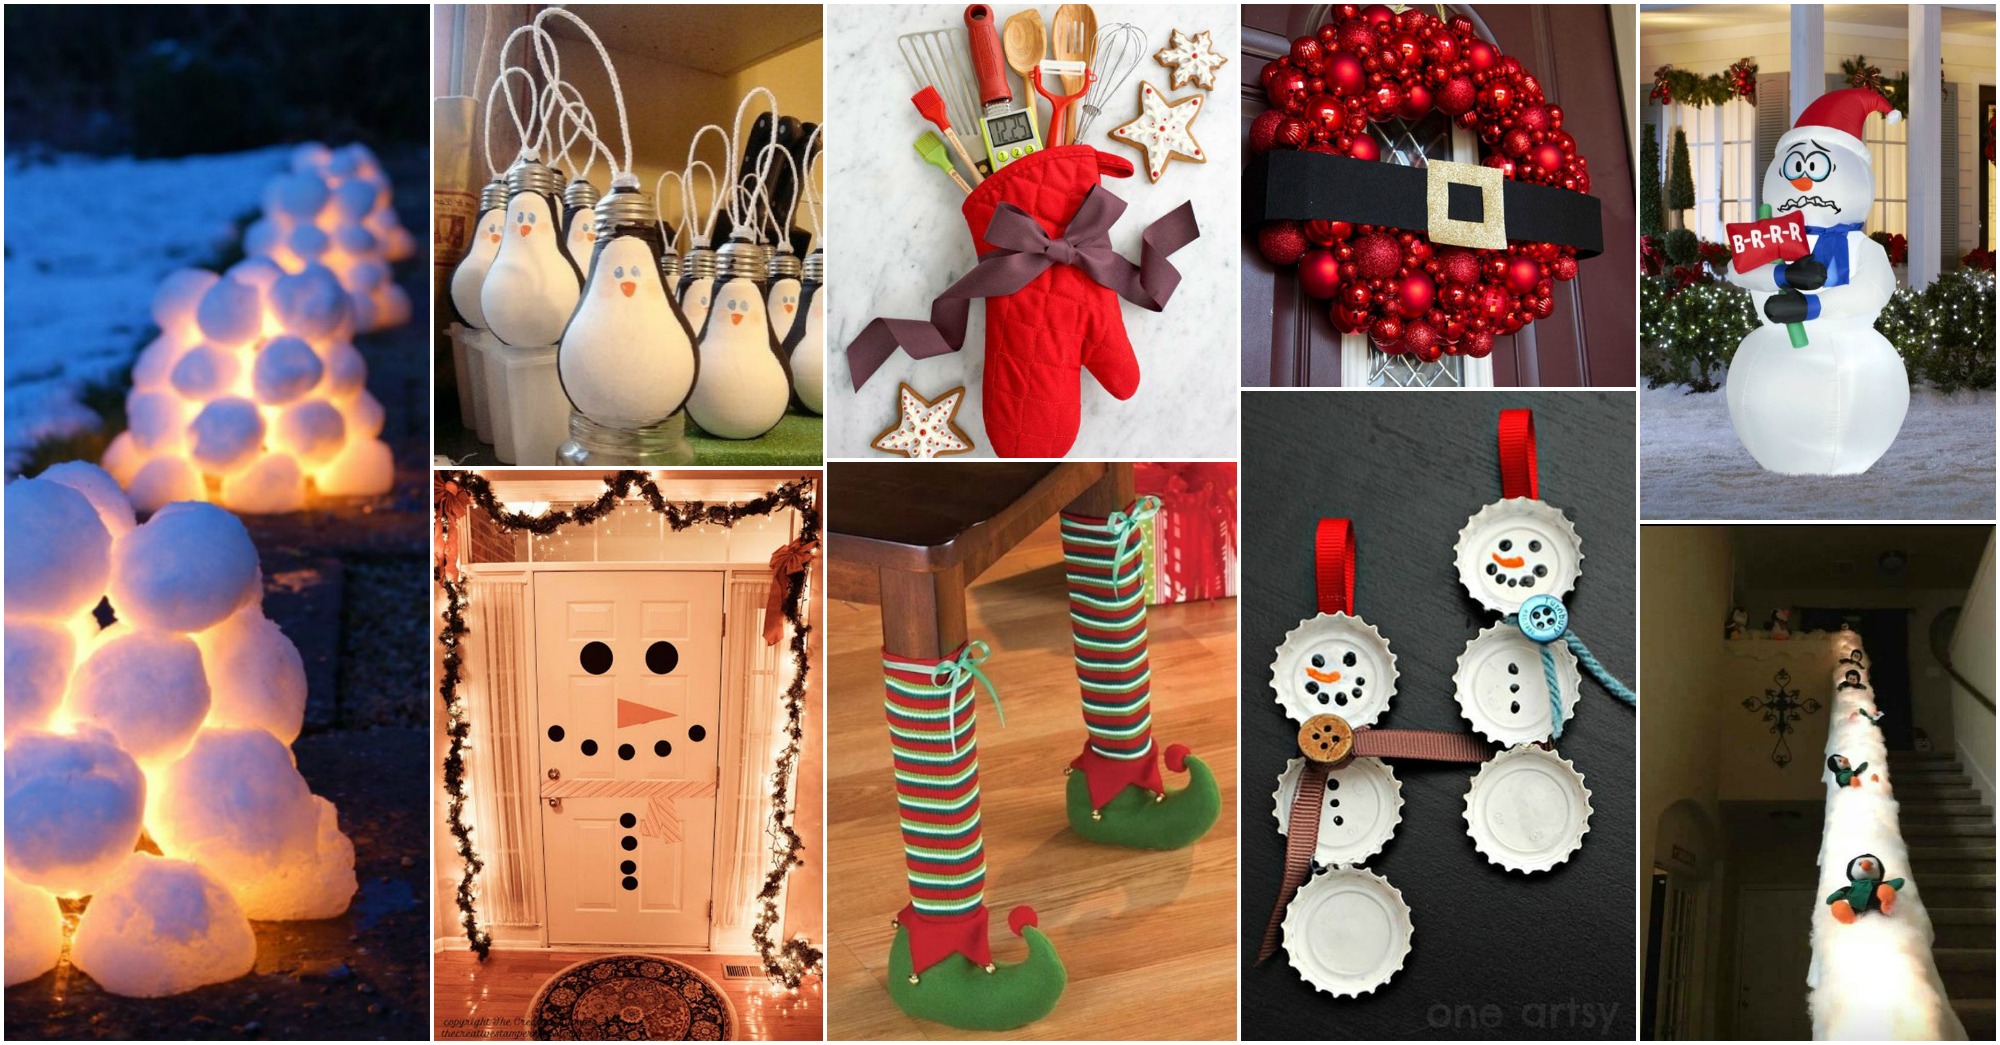 Diy Funny Christmas Decor Ideas That Will Make You Cheerful for funny home decor ideas for Your house